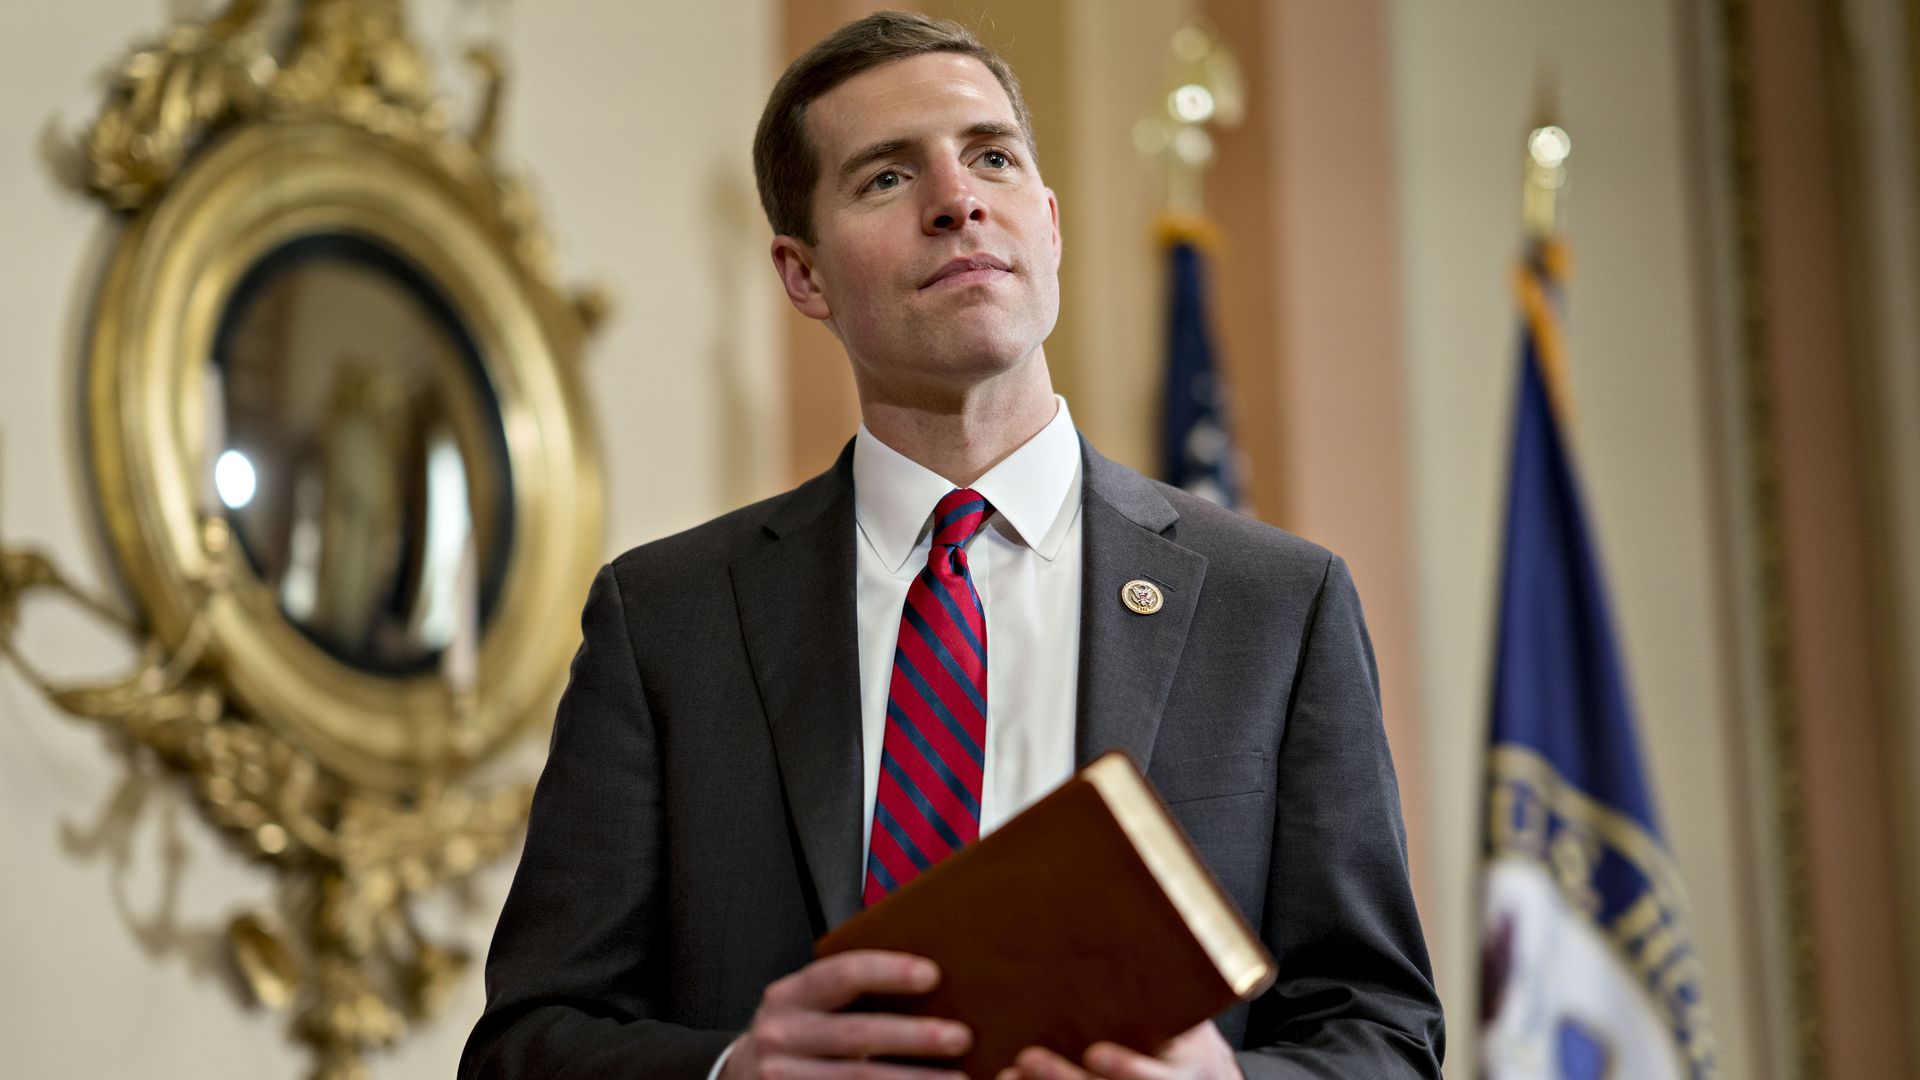 Rep. Conor Lamb is seen holding a Bible.